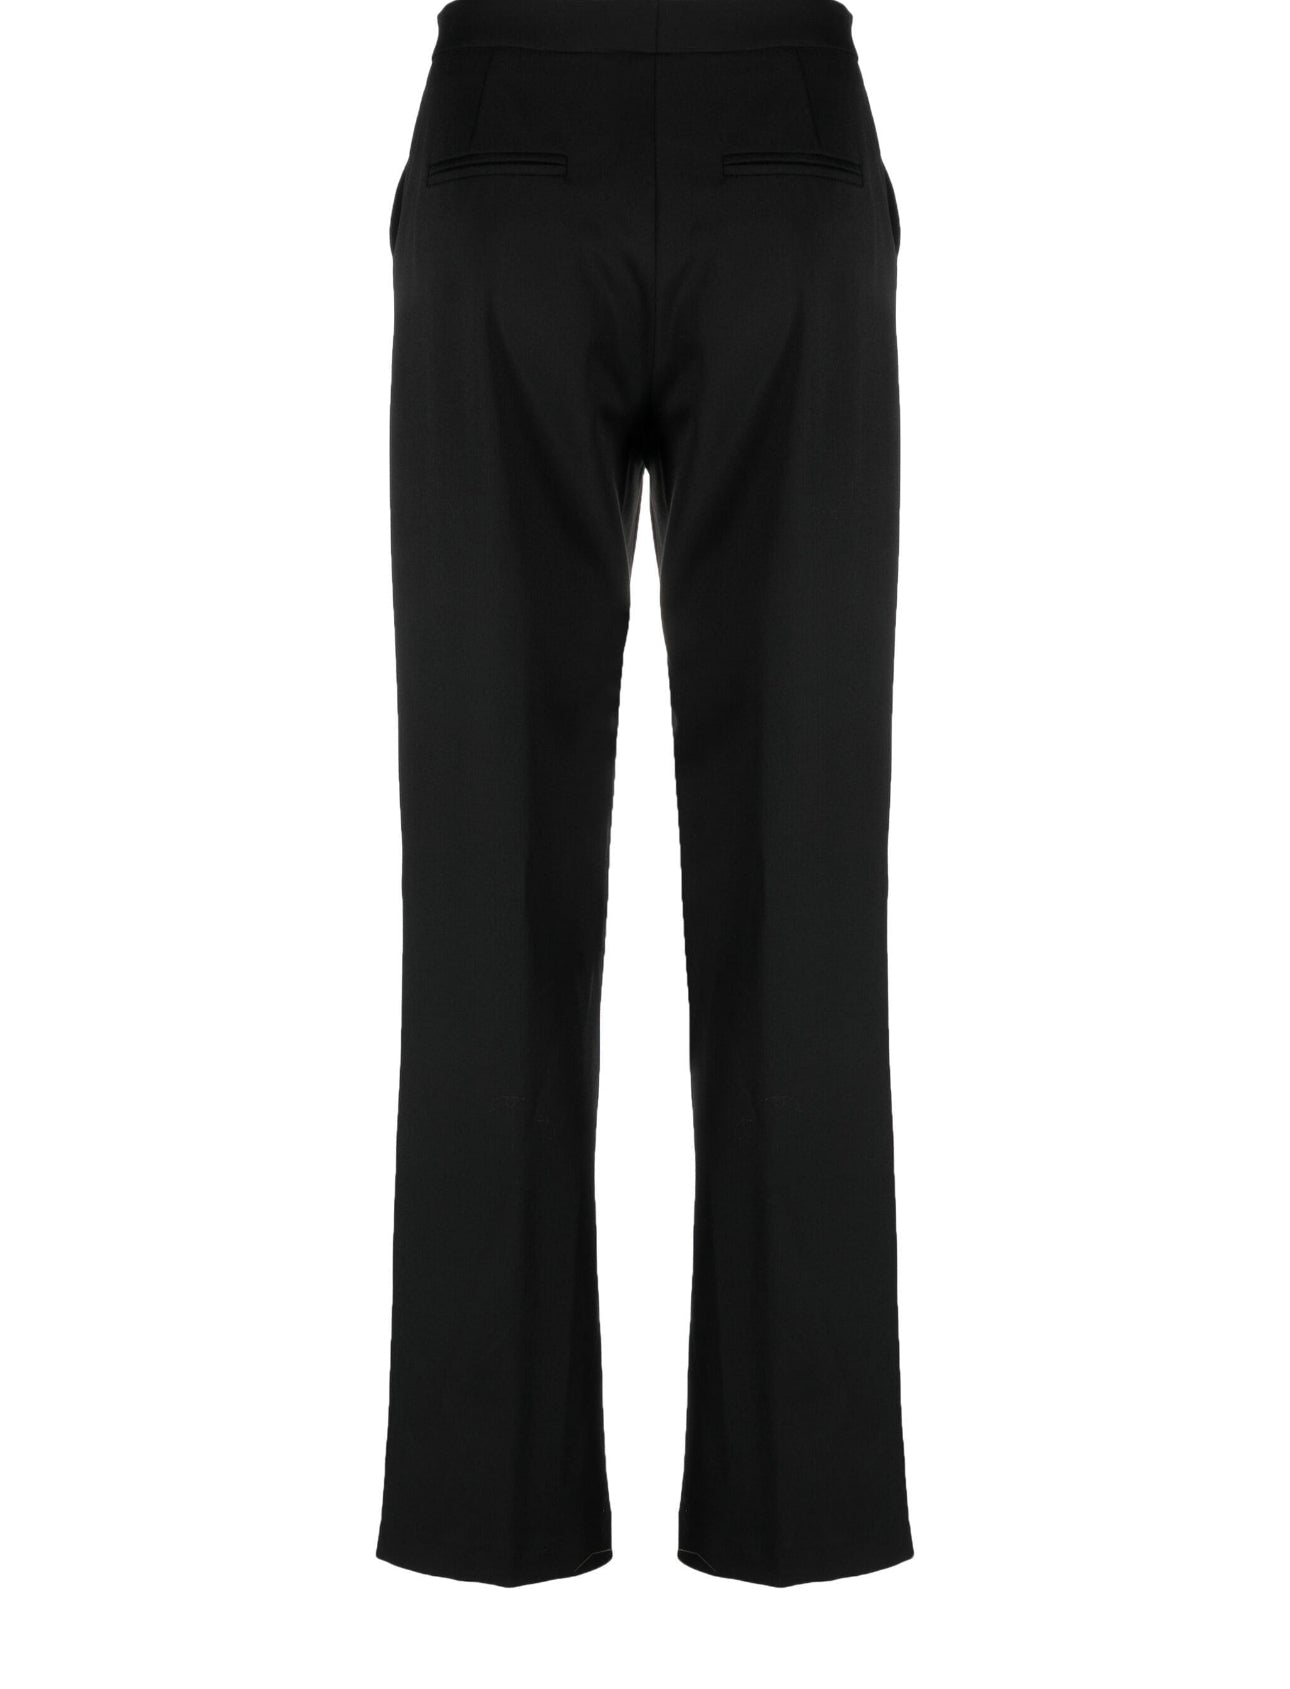 Federica Tosi four-pocket tailored trousers